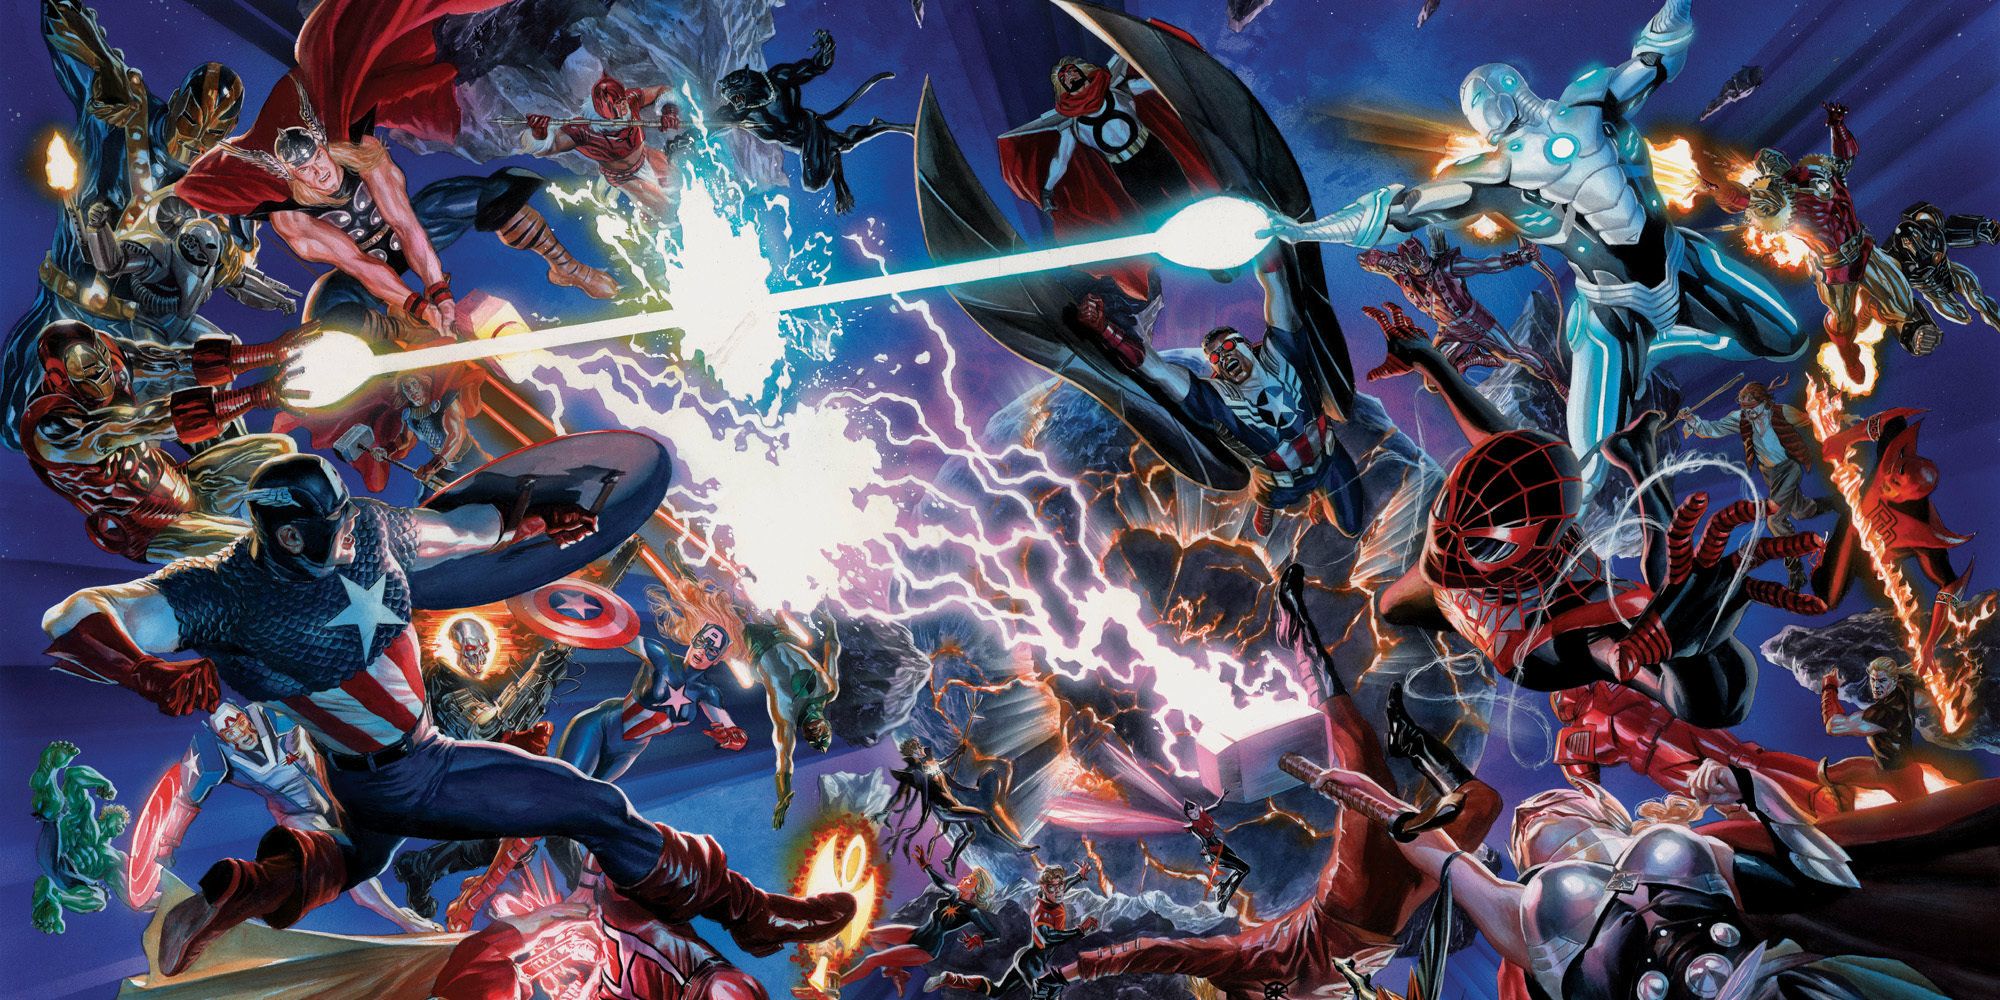 Variants of Marvel characters fight each other in Secret Wars comic.